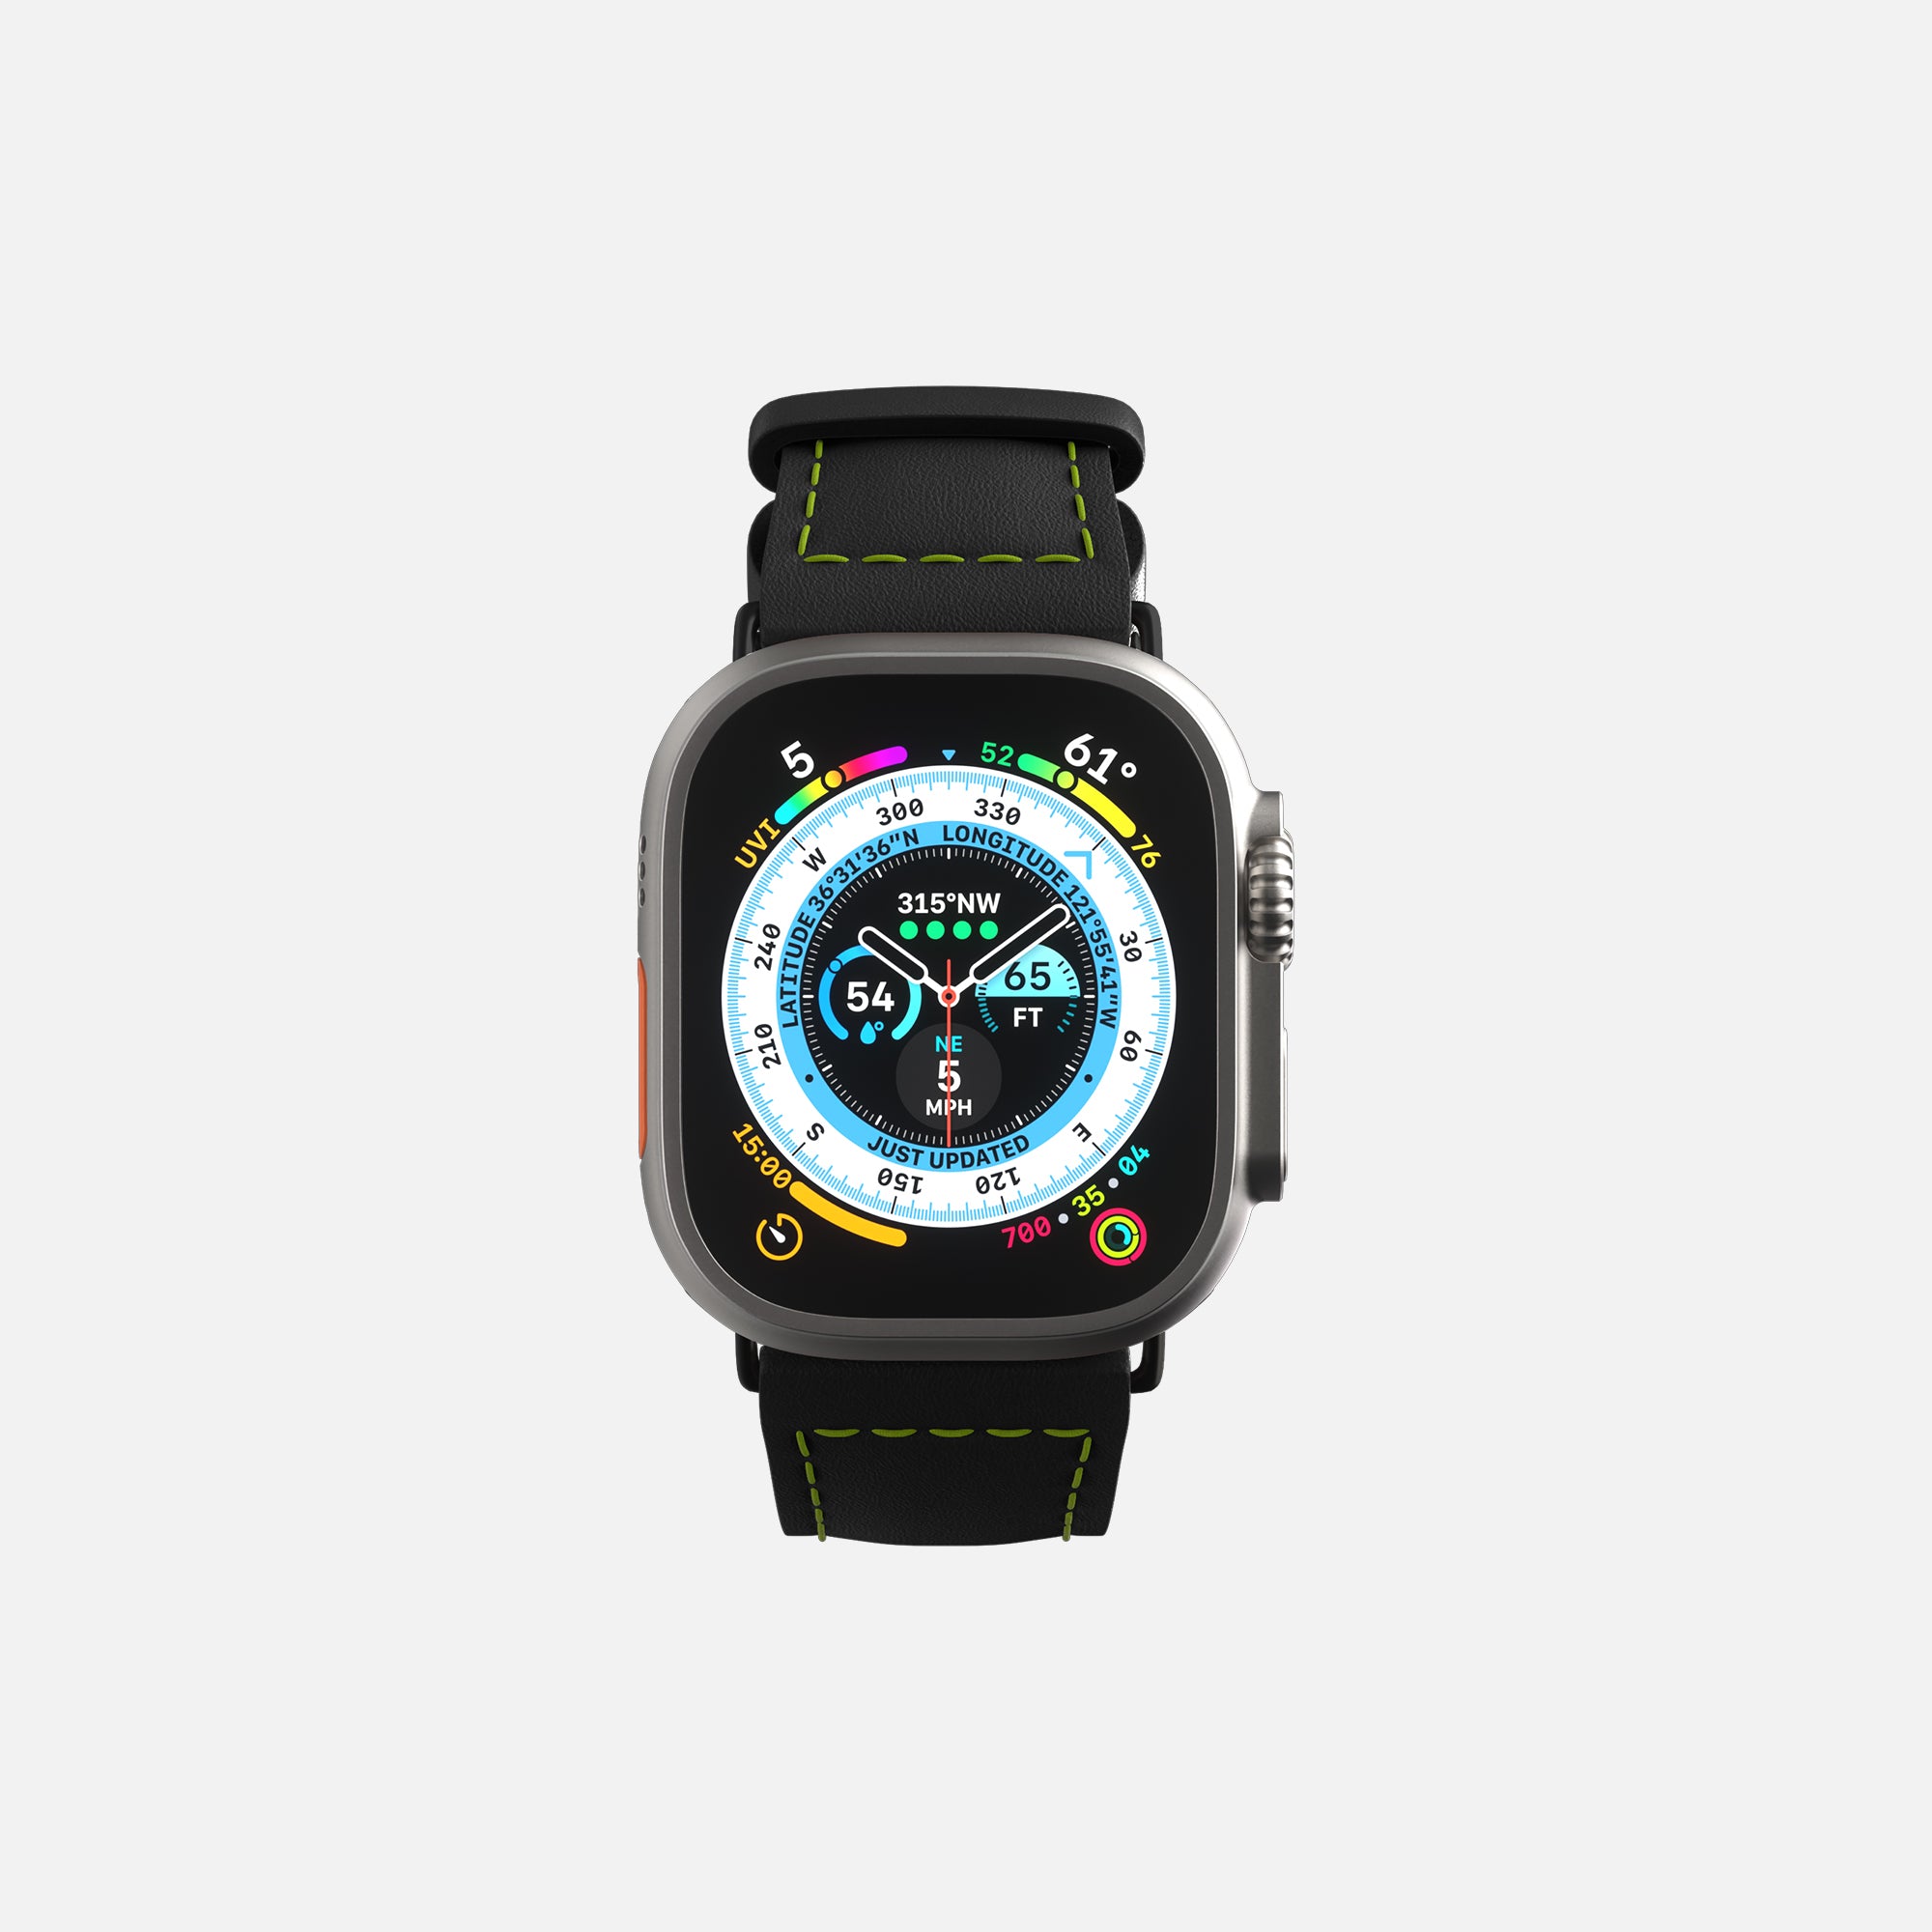 Apple Smartwatch with compass display on white background, modern technology accessory.